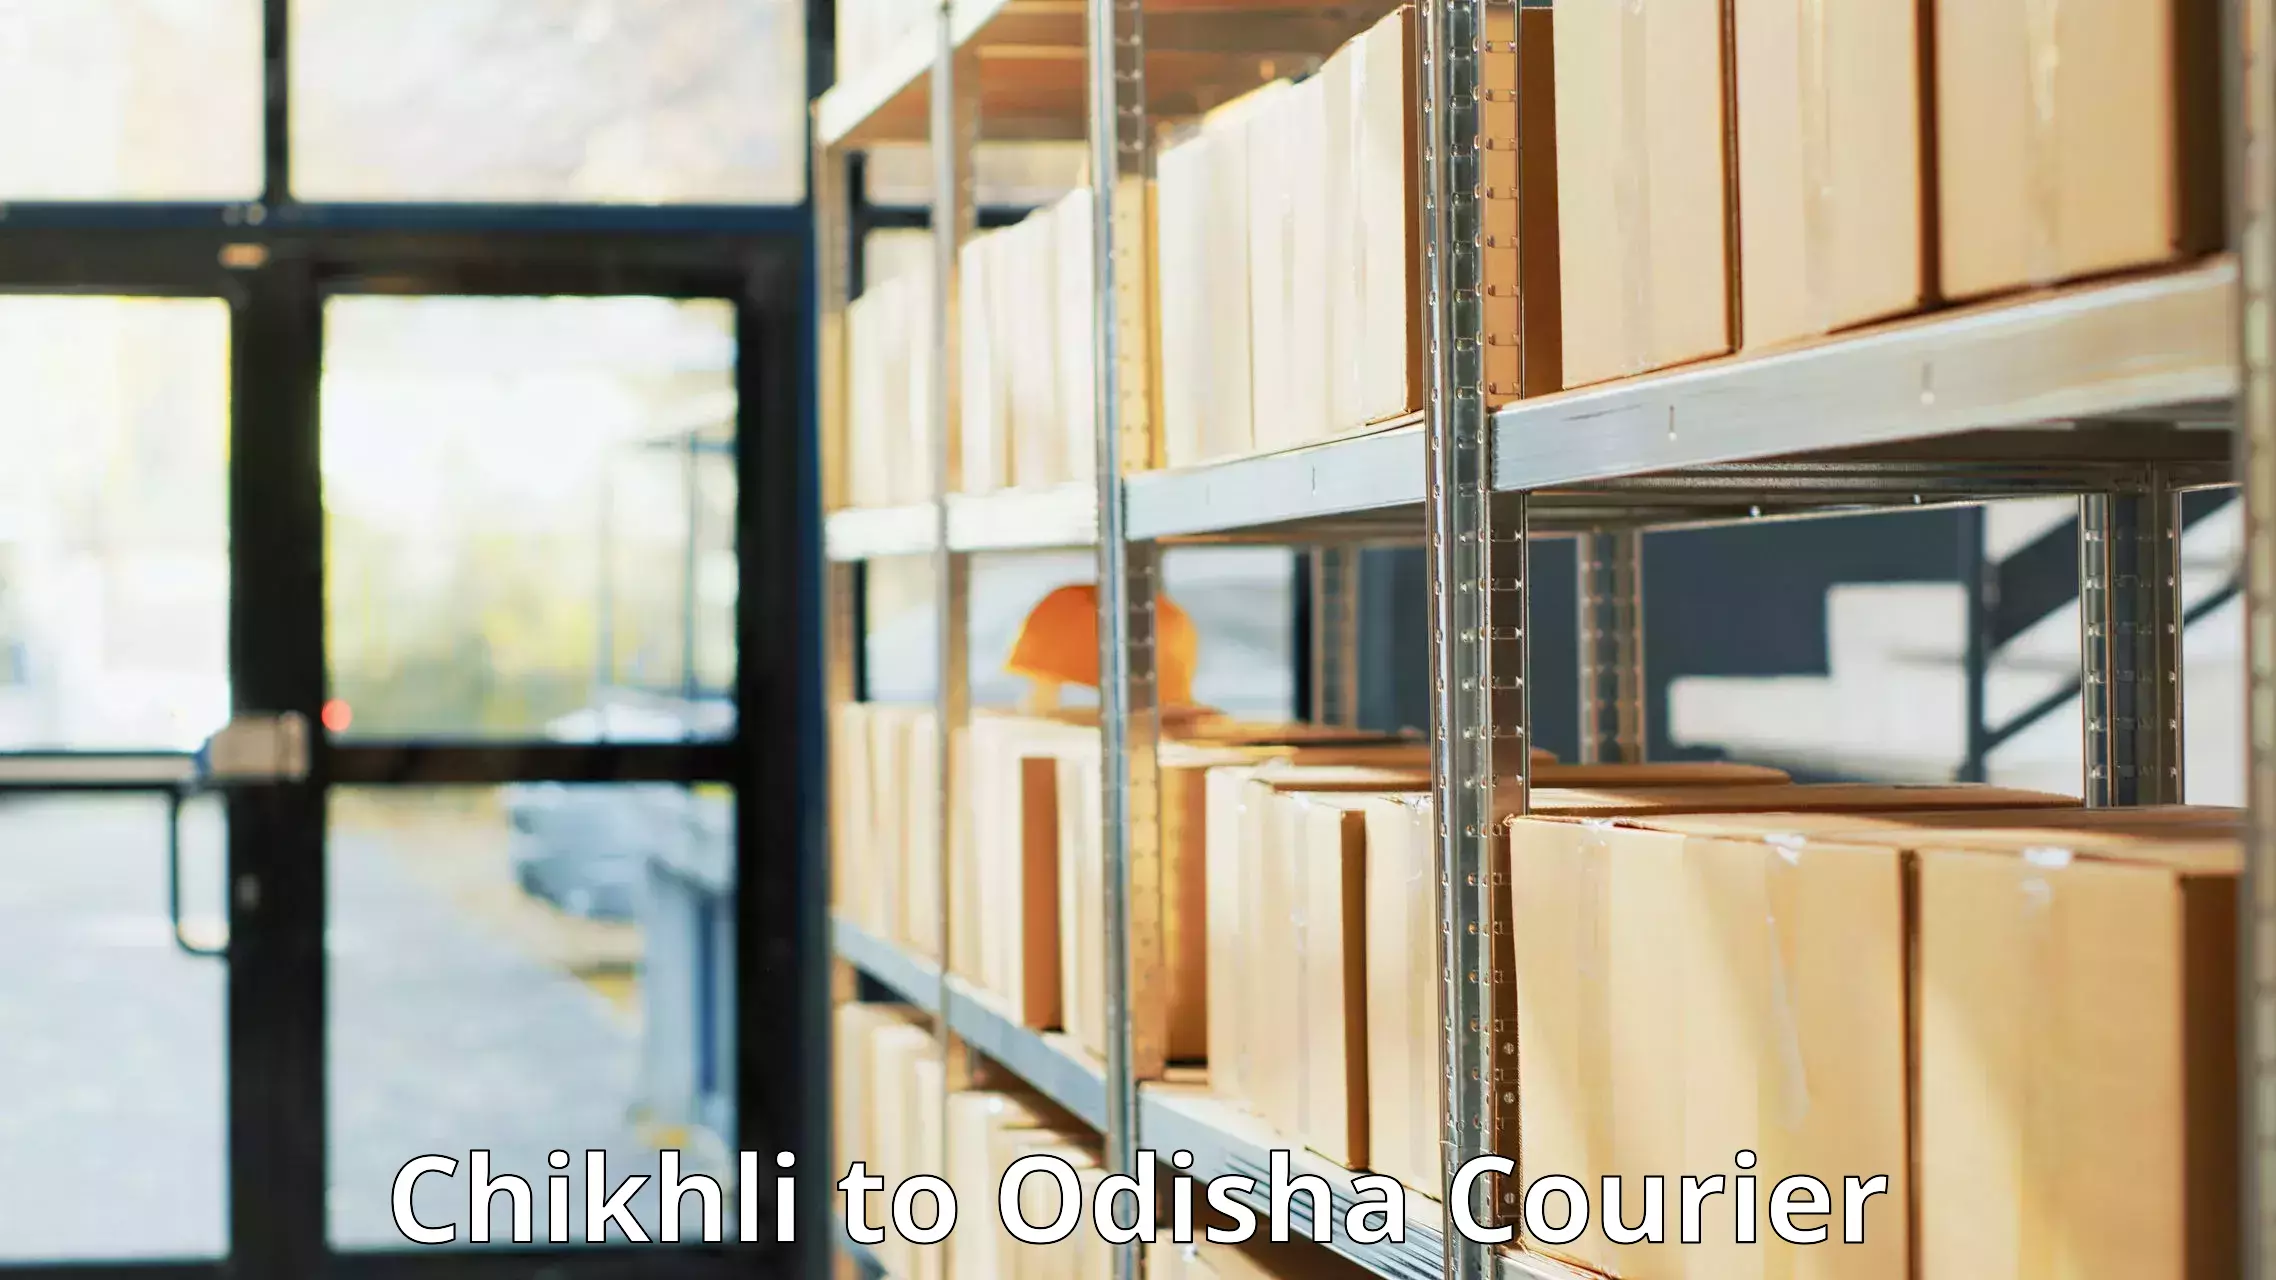 Reliable courier service in Chikhli to Turanga